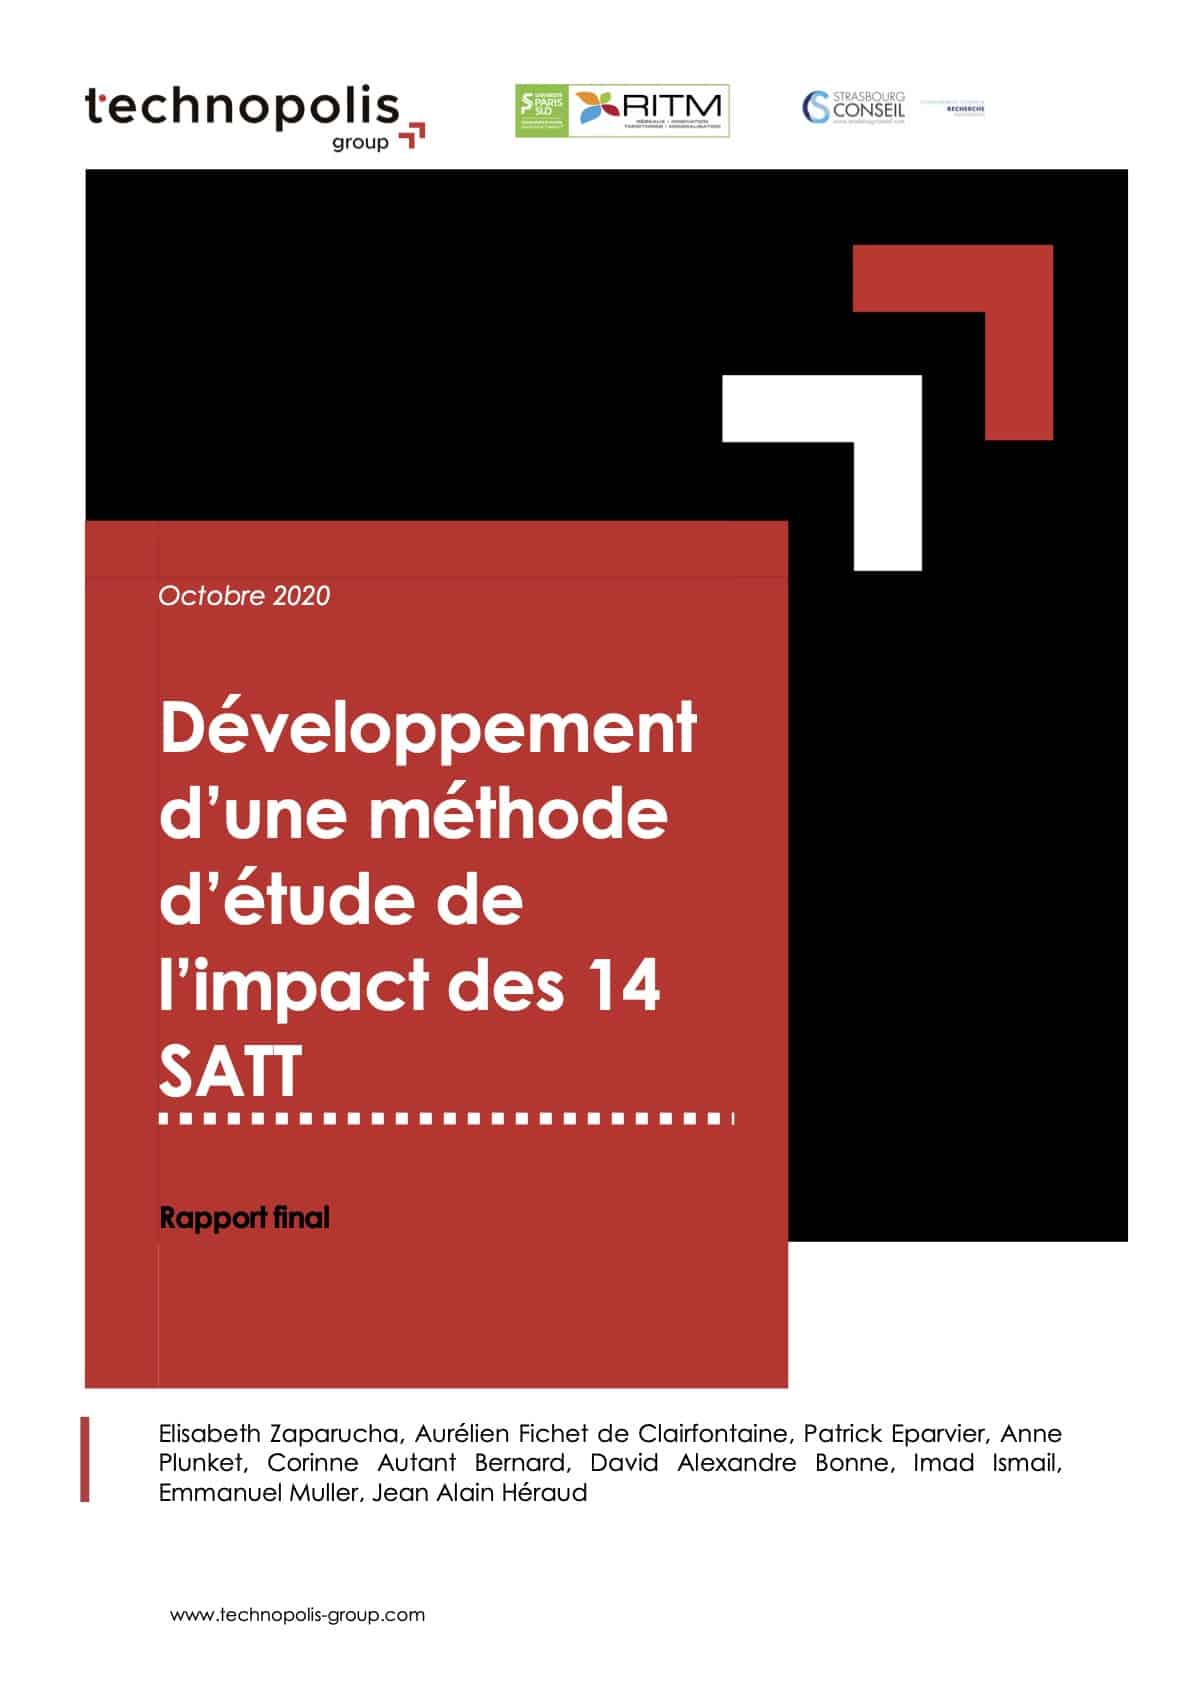 Development of a method to assess the impact of Technology Transfer Acceleration Companies